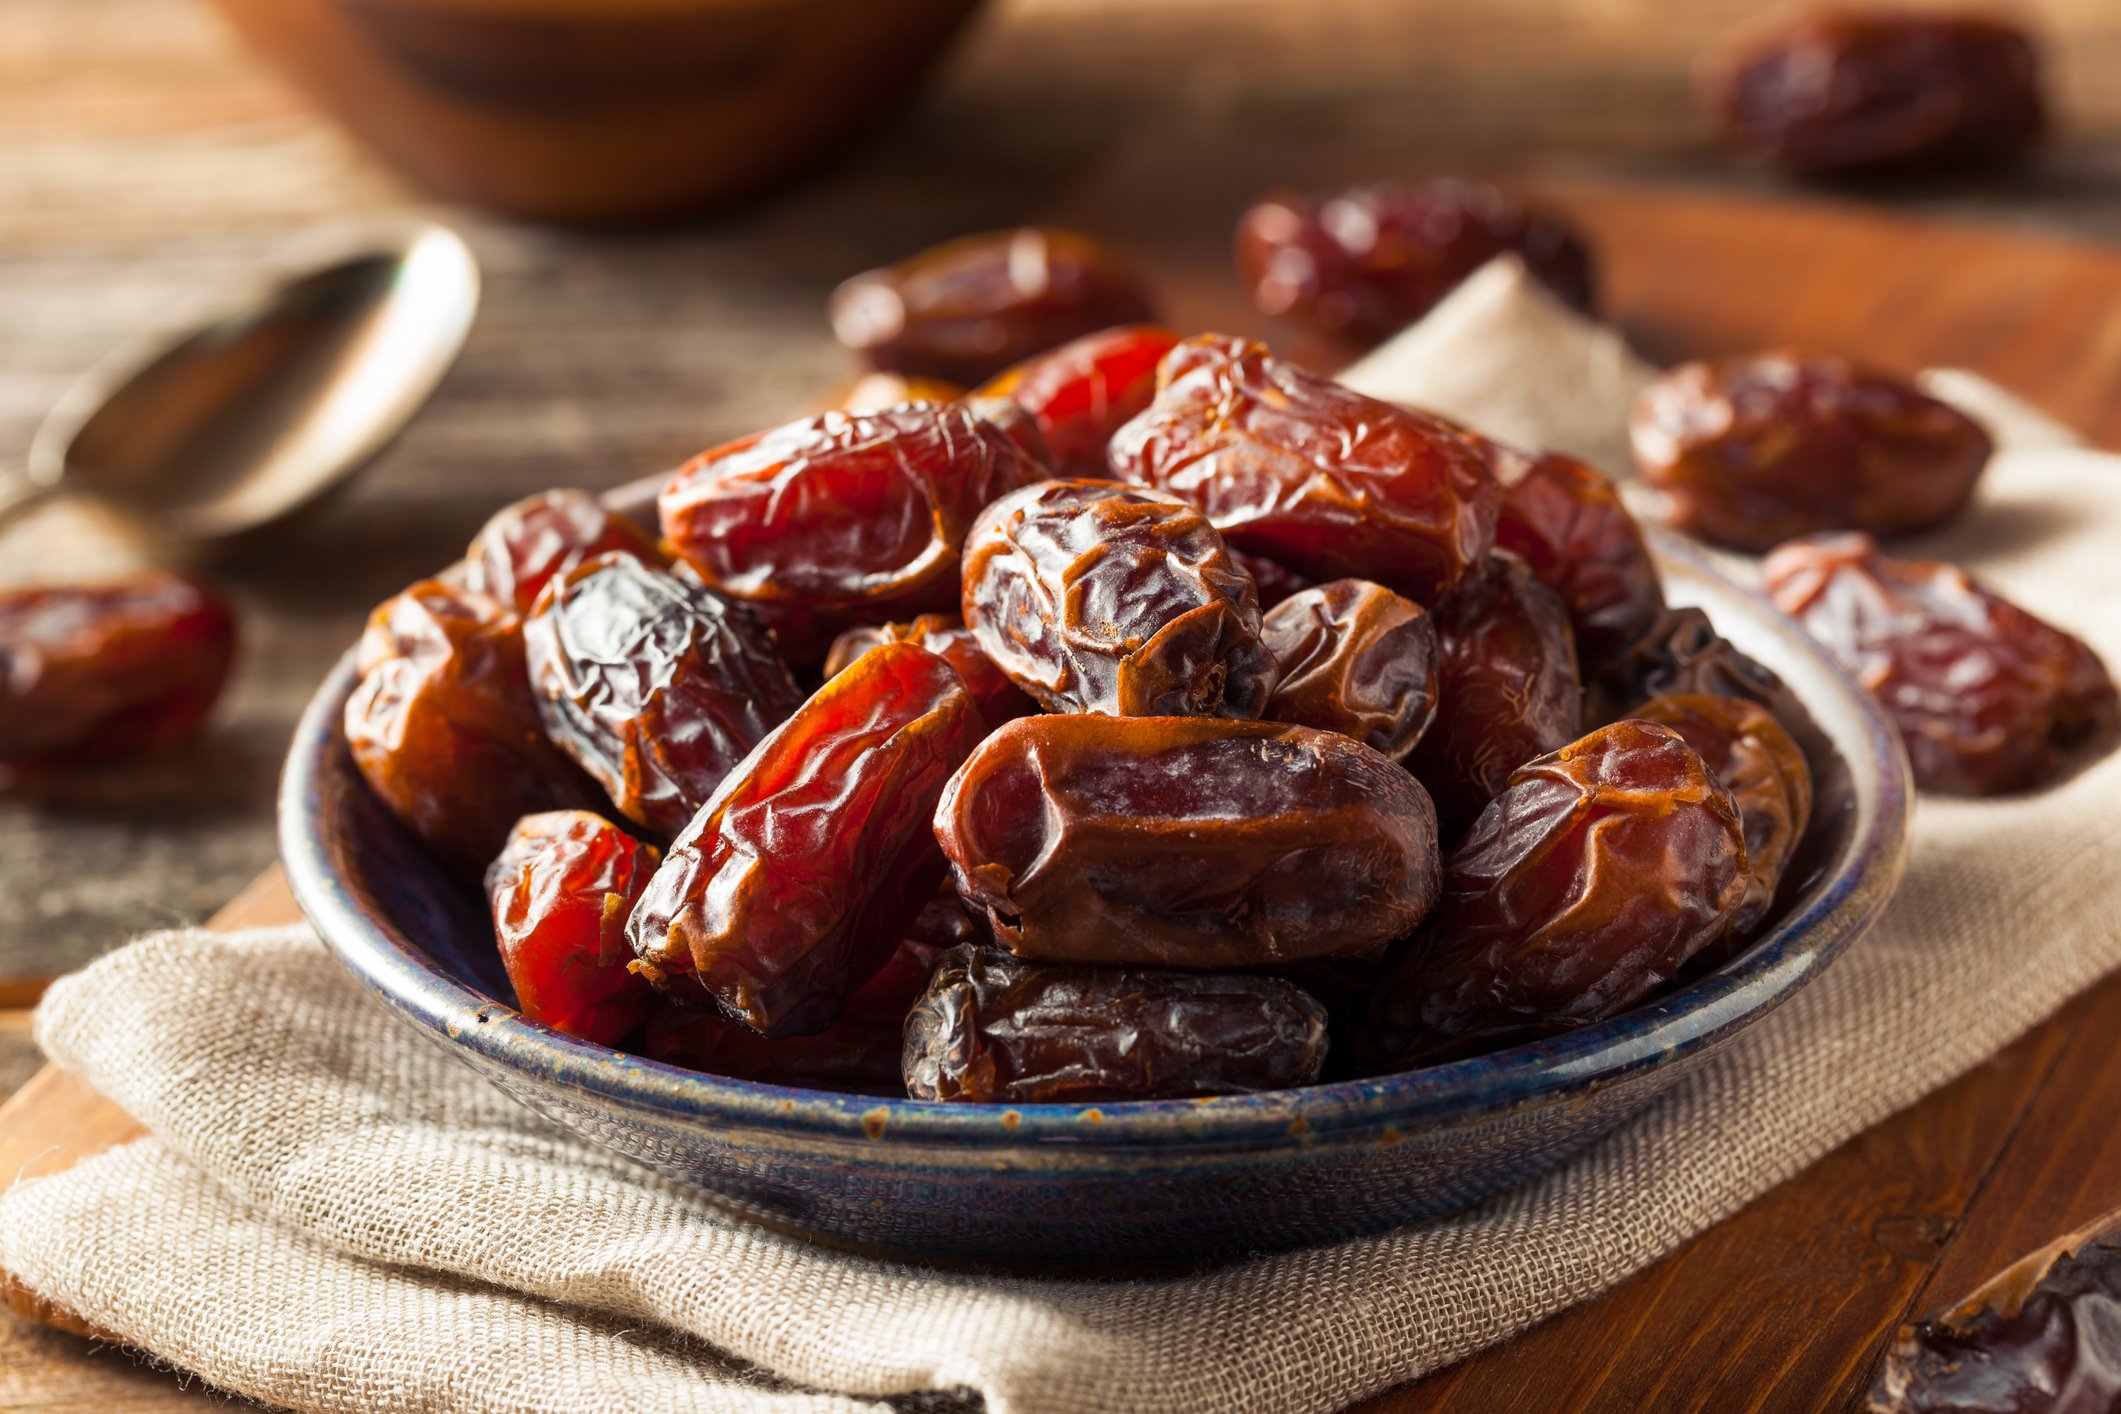 Medjools are one of the most popular types of dates thanks to being large, soft and flavorful. (iStock Photo)